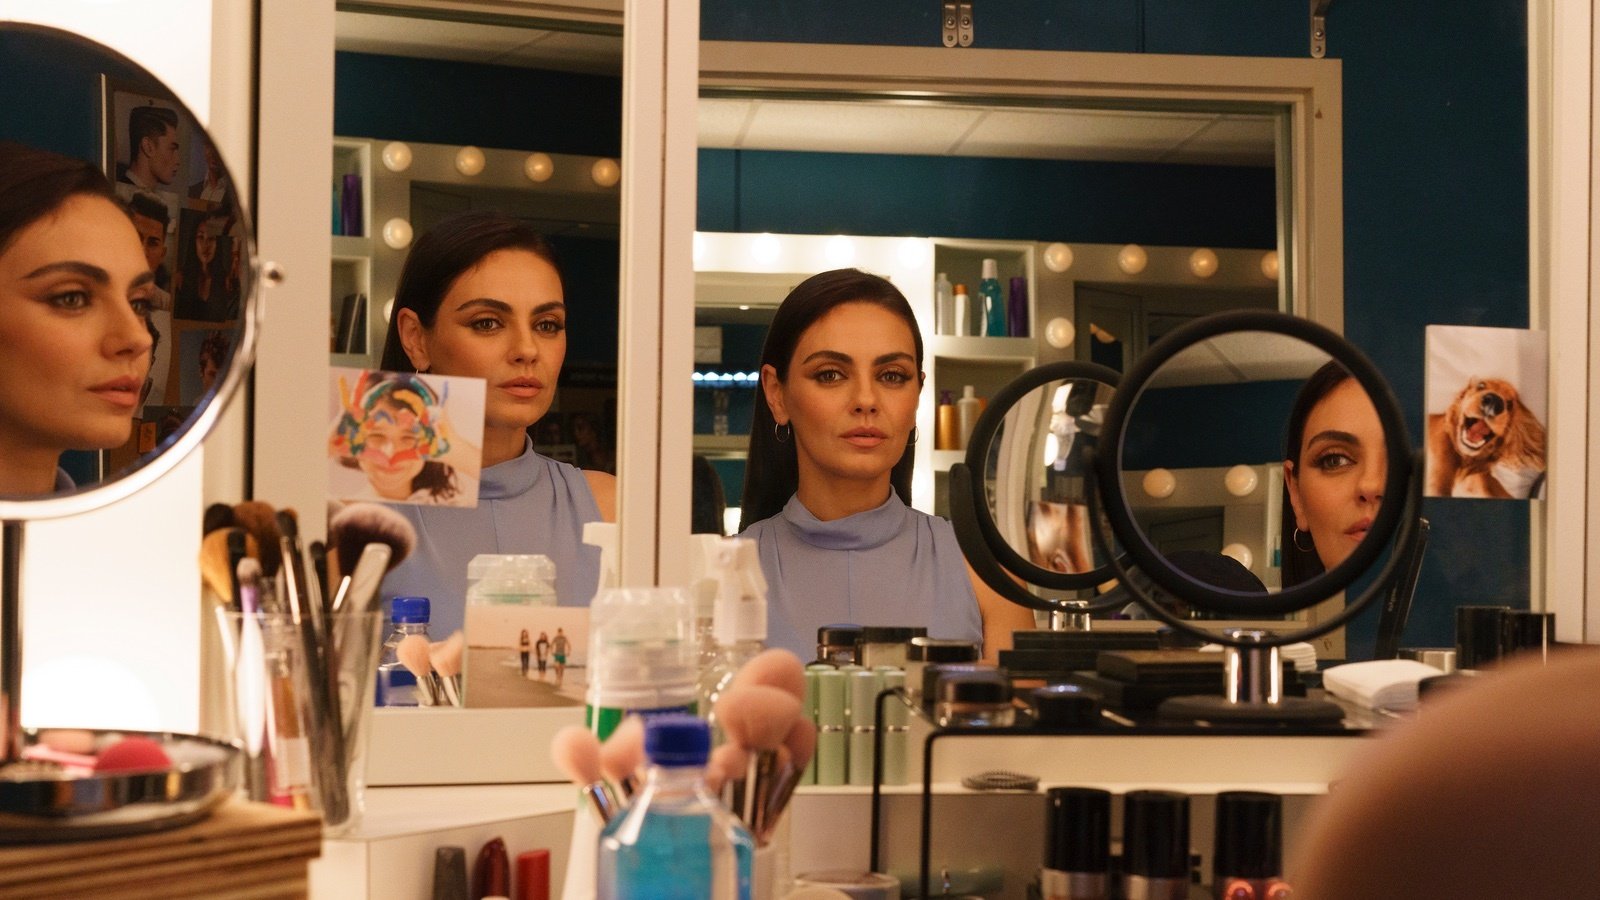 Mila Kunis makes a comeback to thrillers in Netflix’s ‘Luckiest Girl Alive’ trailer